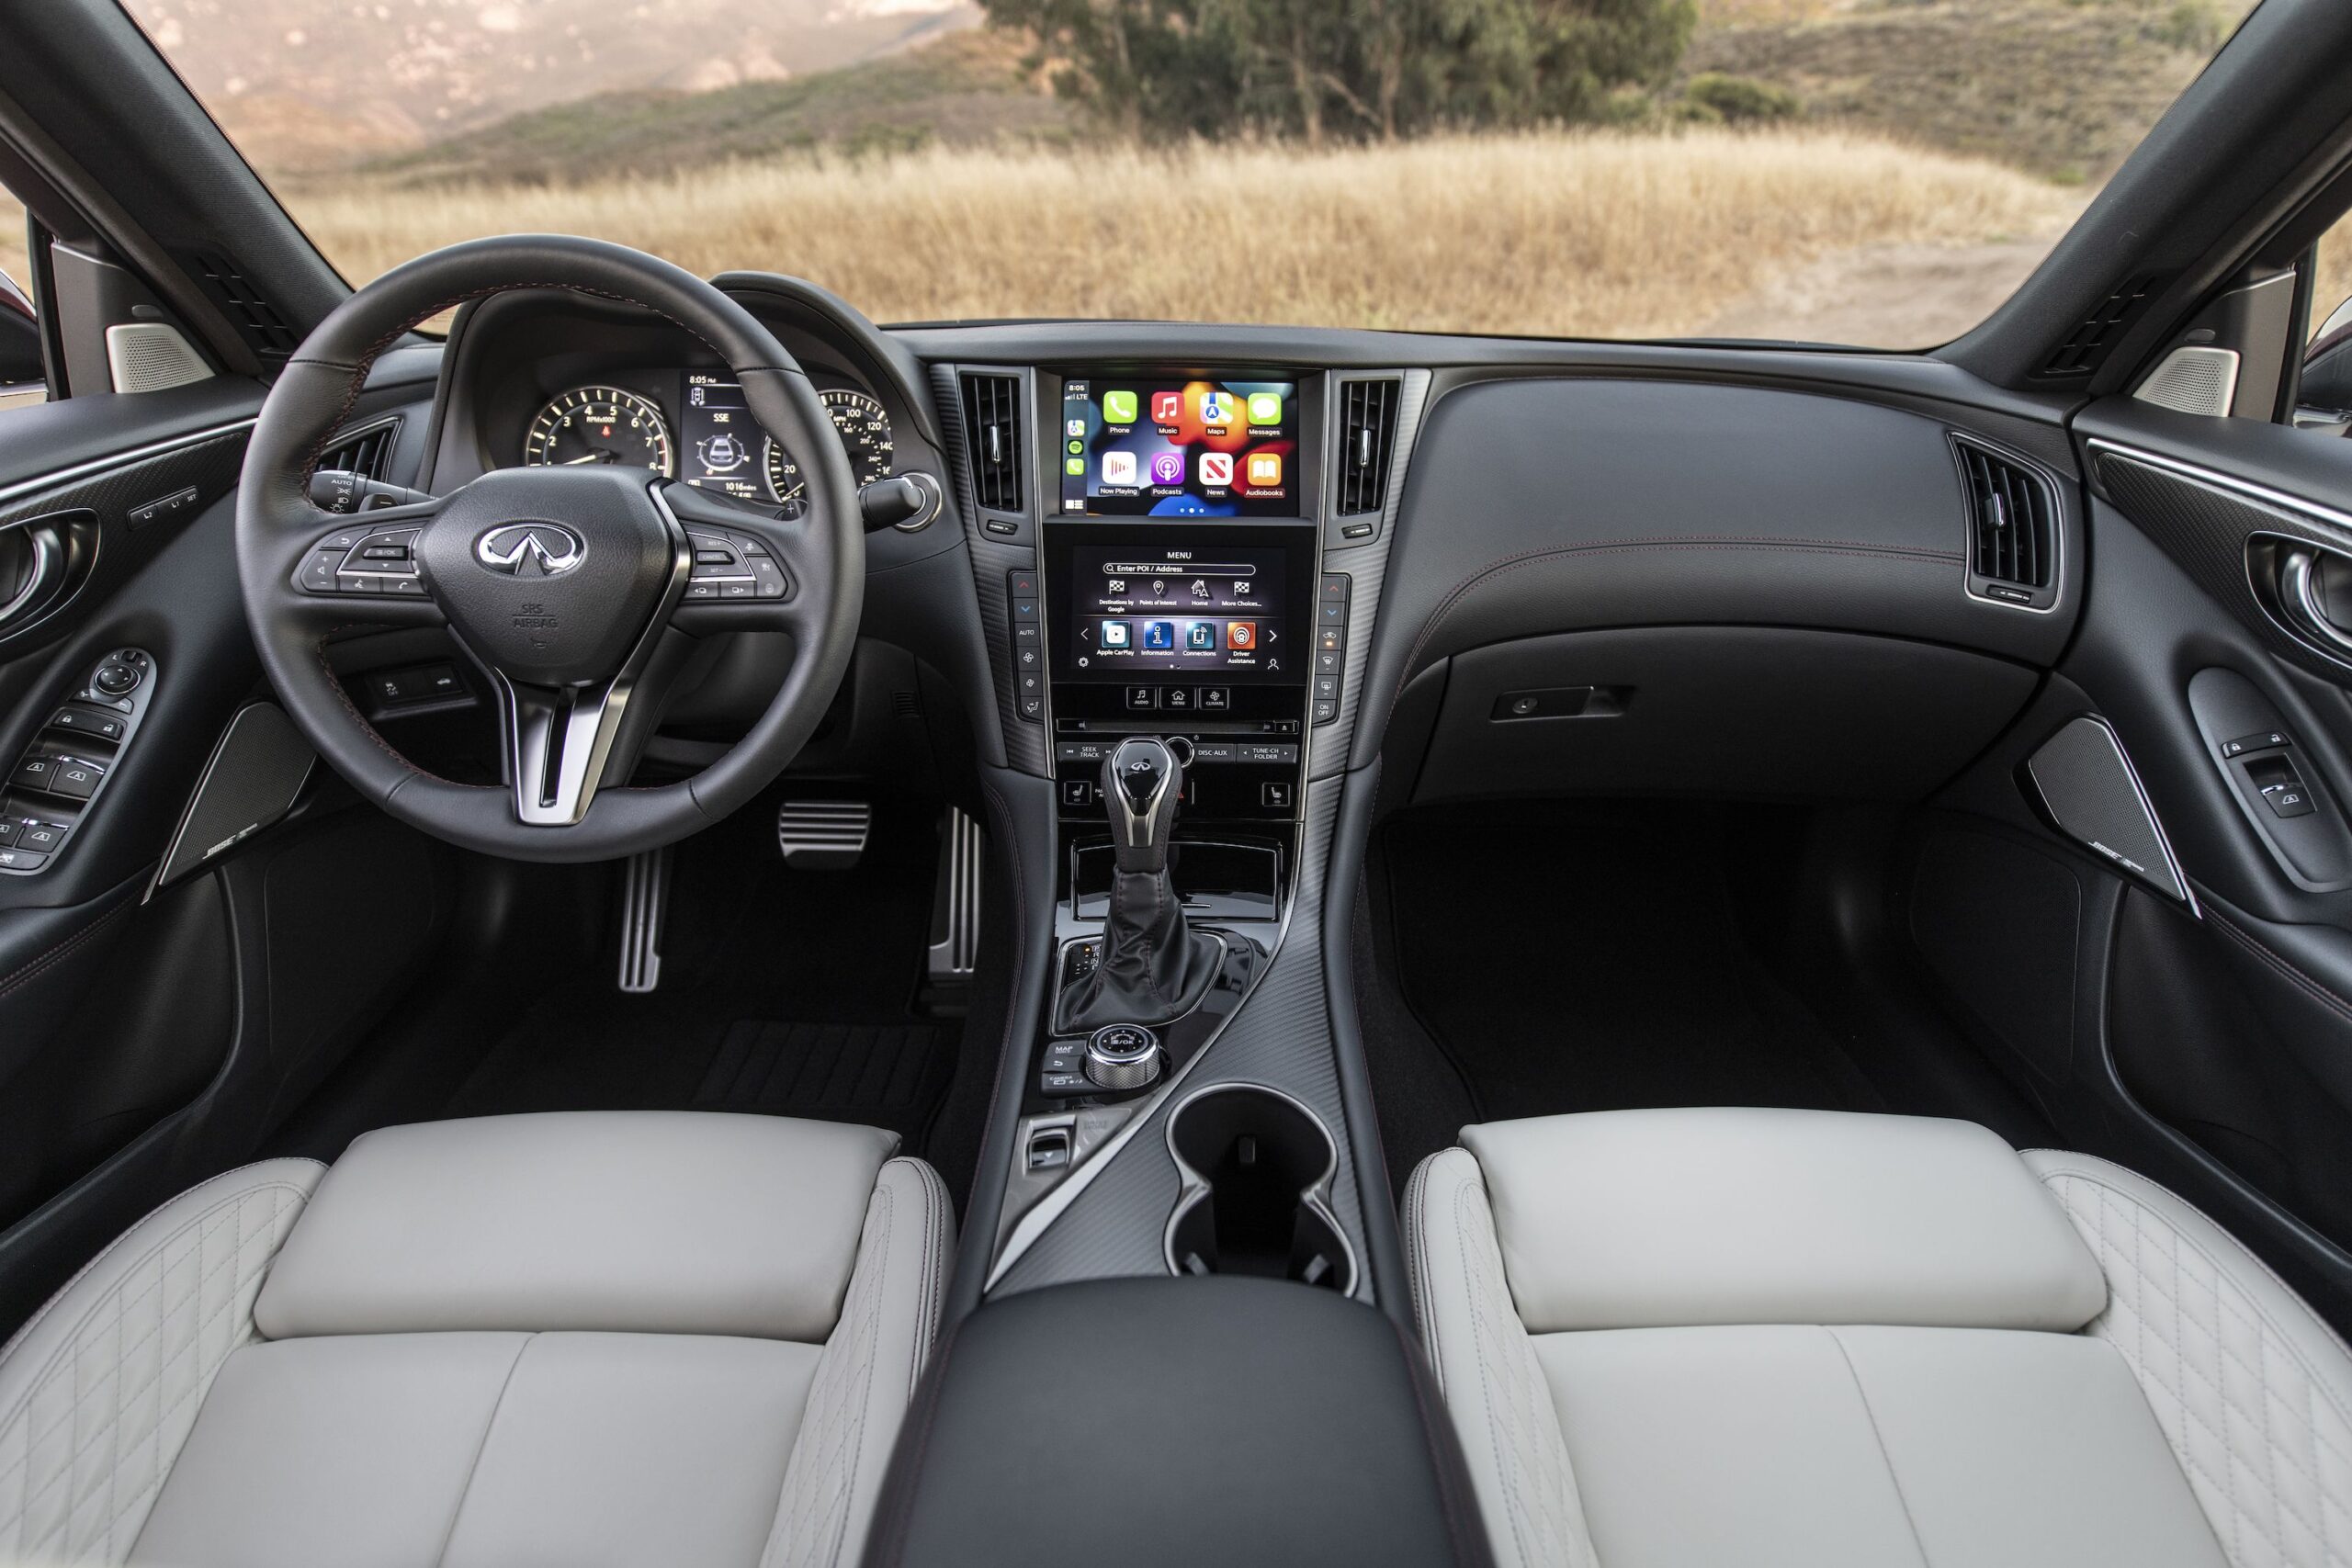 Infiniti Q50’s Connectivity and Multimedia